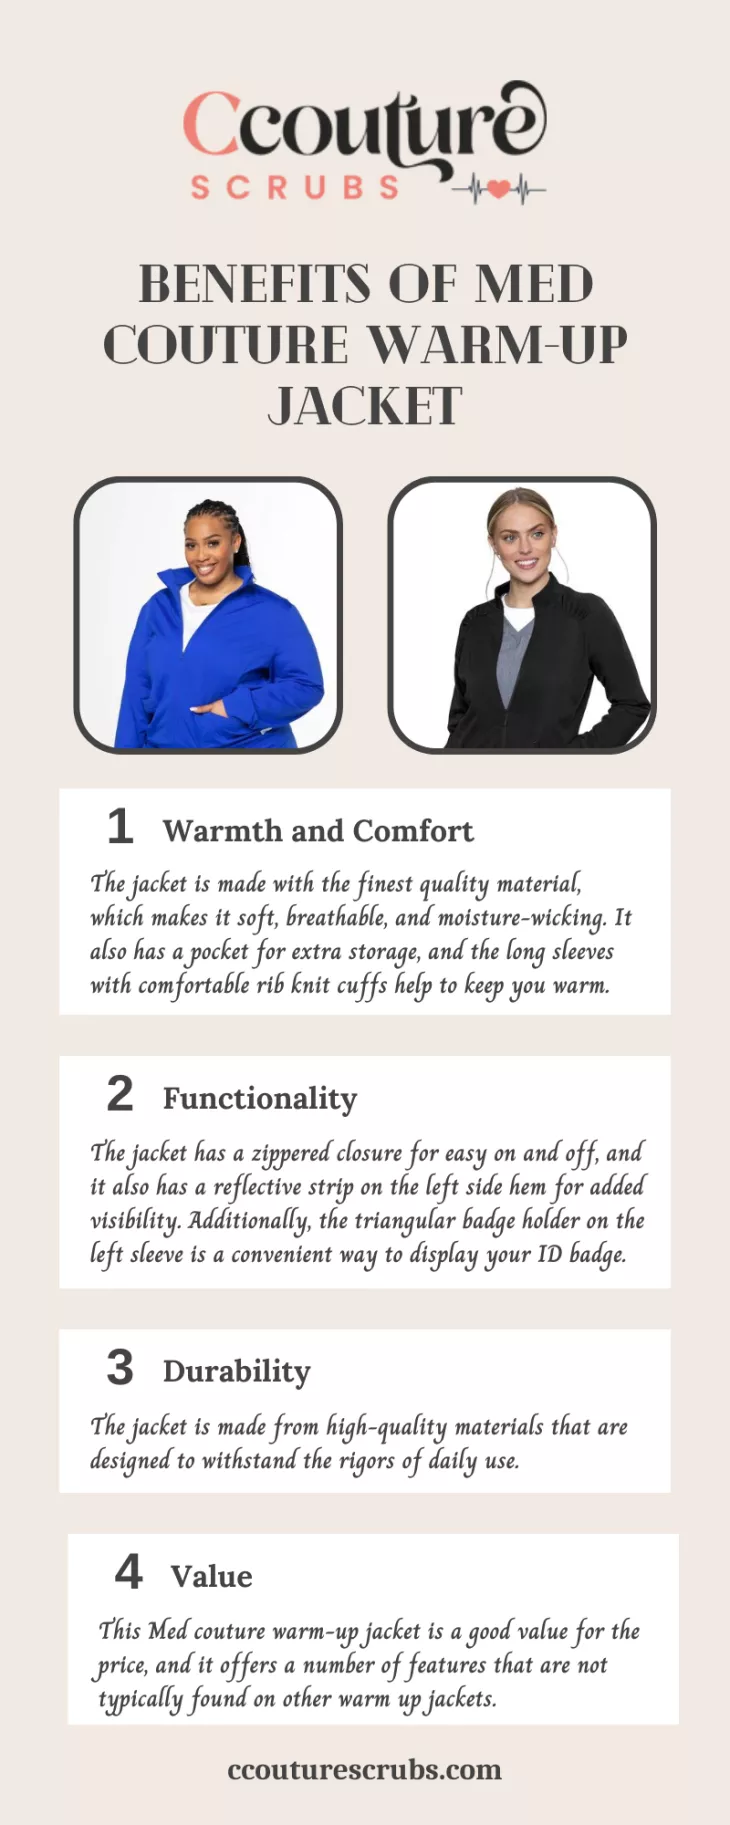 Benefits of Med Couture Warm Up Jacket